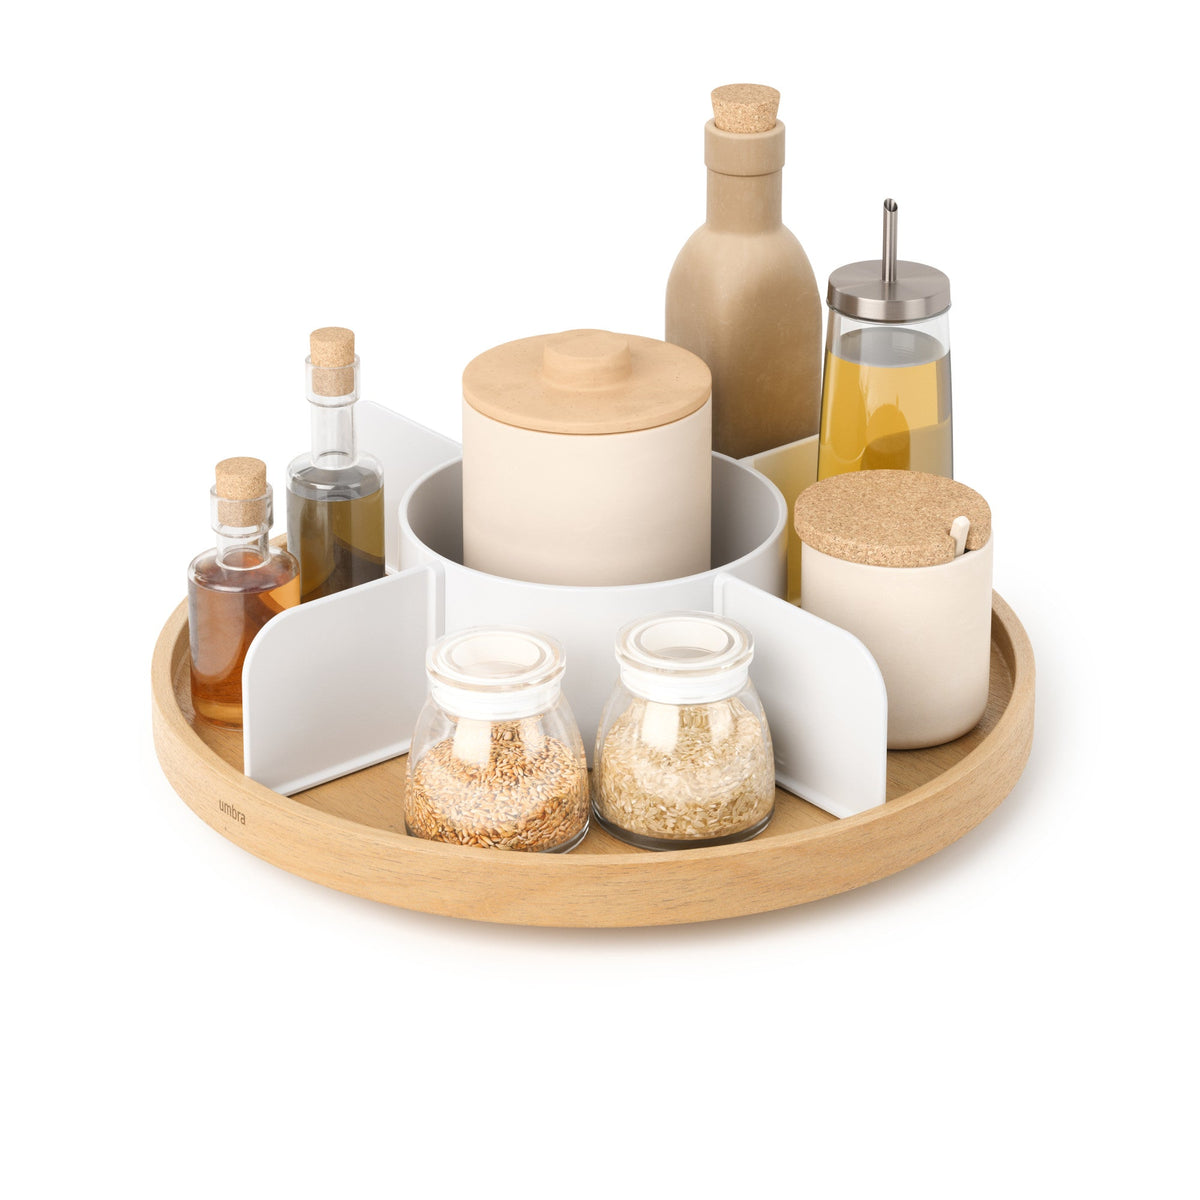 Umbra Bellwood Lazy Susan with Dividers, White-Natural